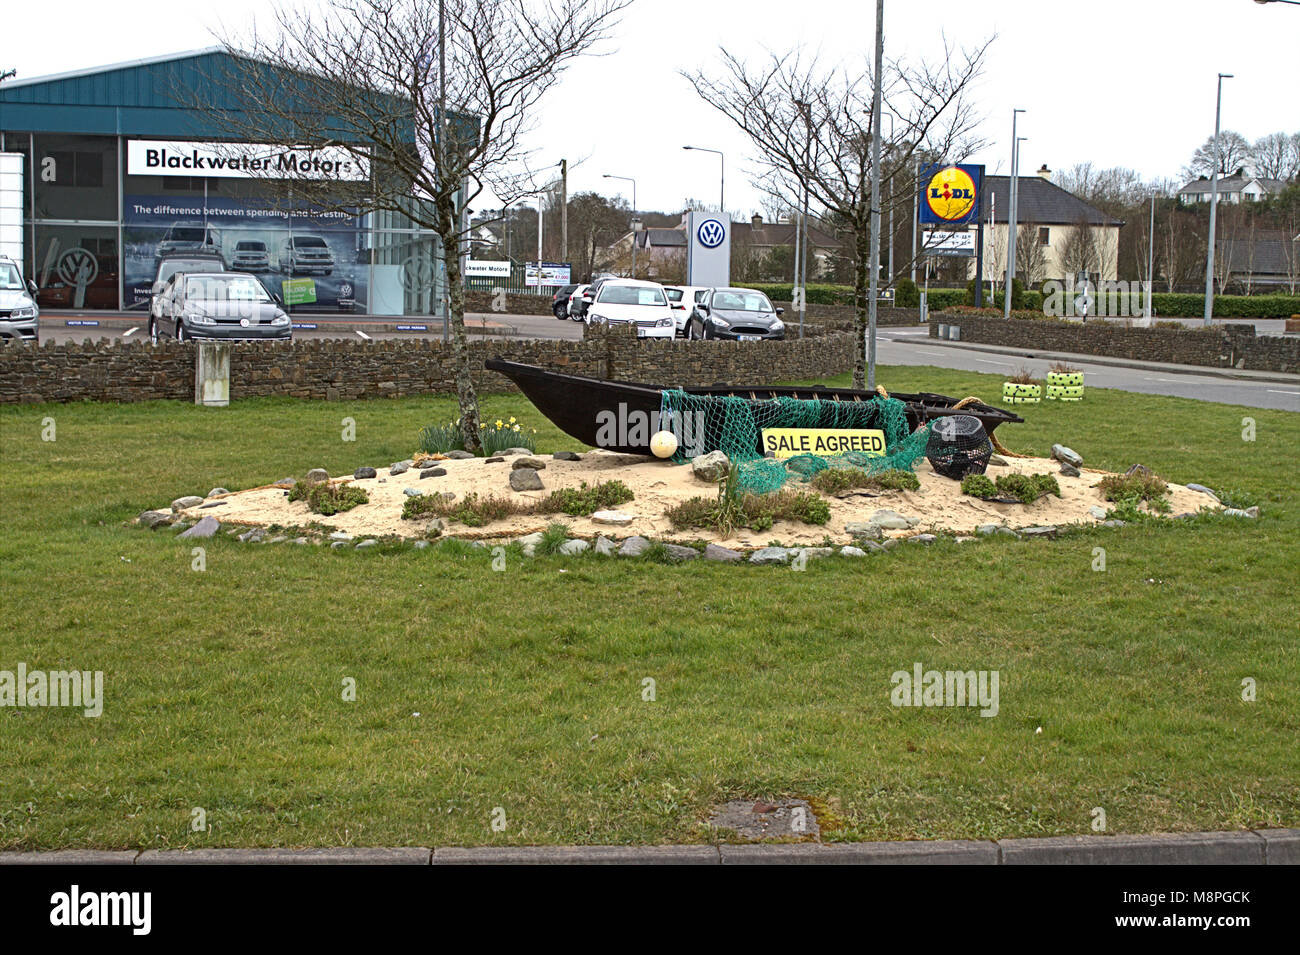 boat sale agreed as a roadside decoration of a roundabout in skibbereen, west cork, ireland Stock Photo